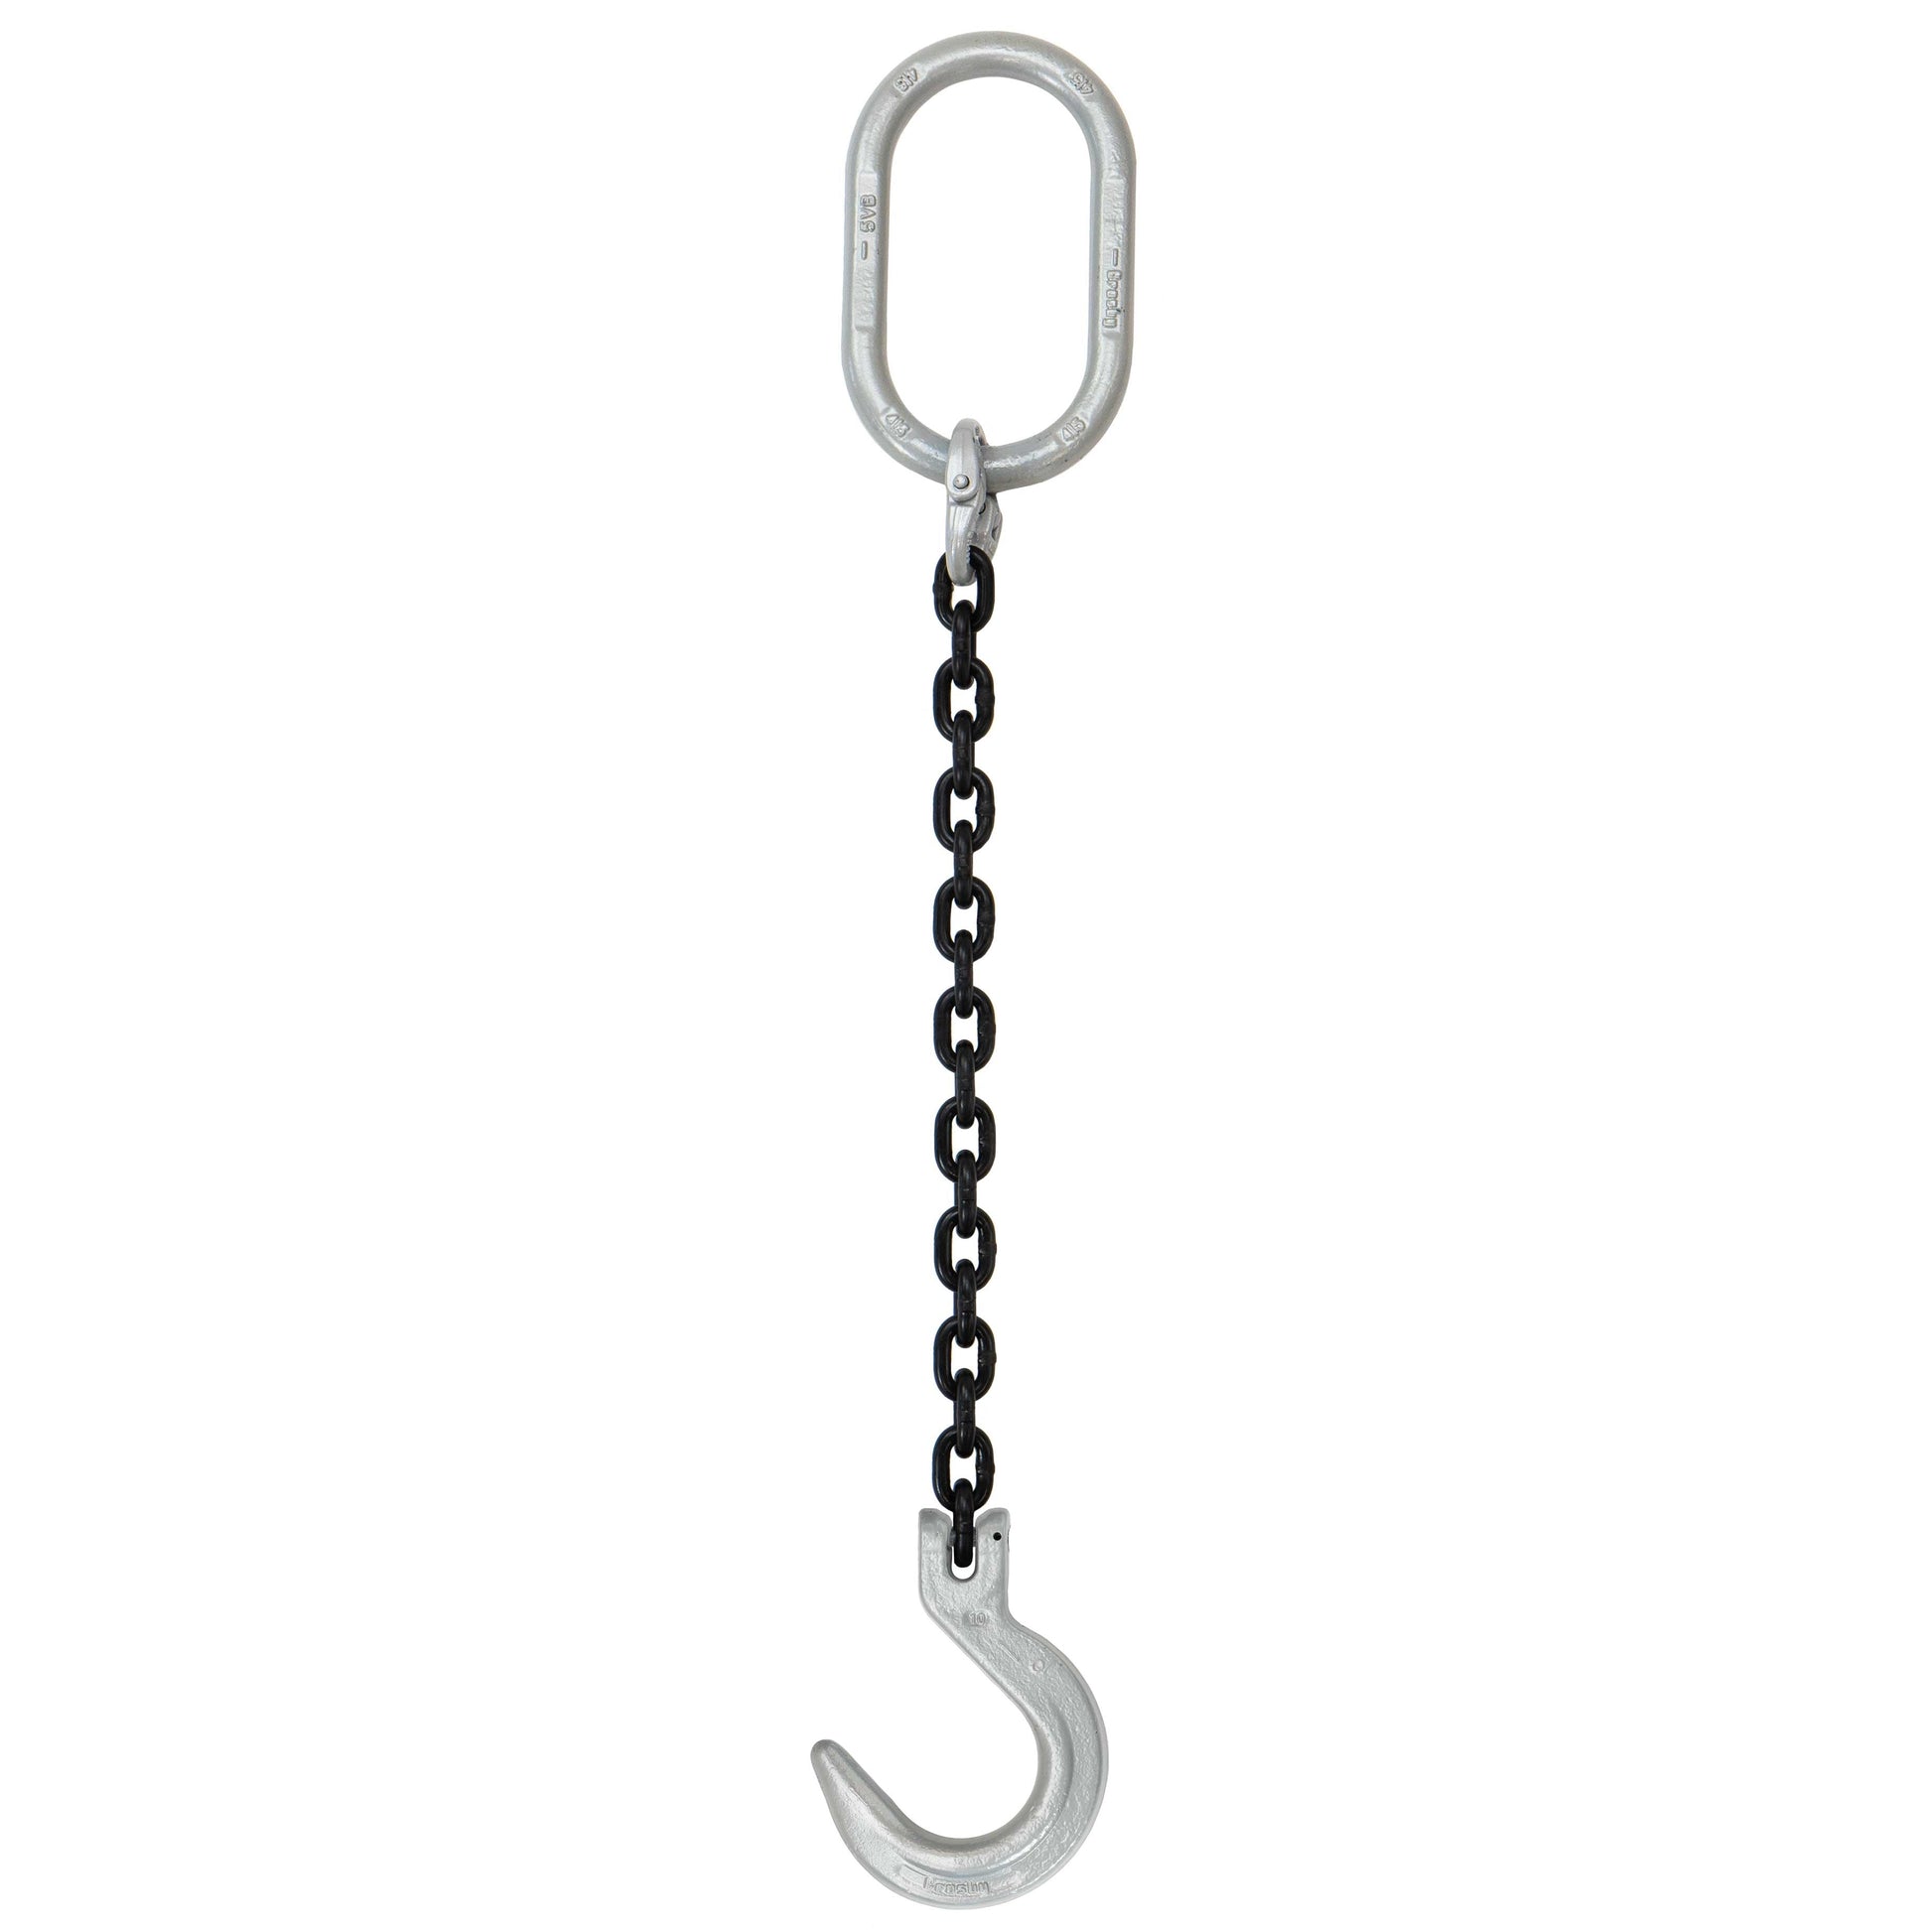 516 inch x 6 foot Domestic Single Leg Chain Sling w Crosby Foundry Hook Grade 100 image 1 of 2